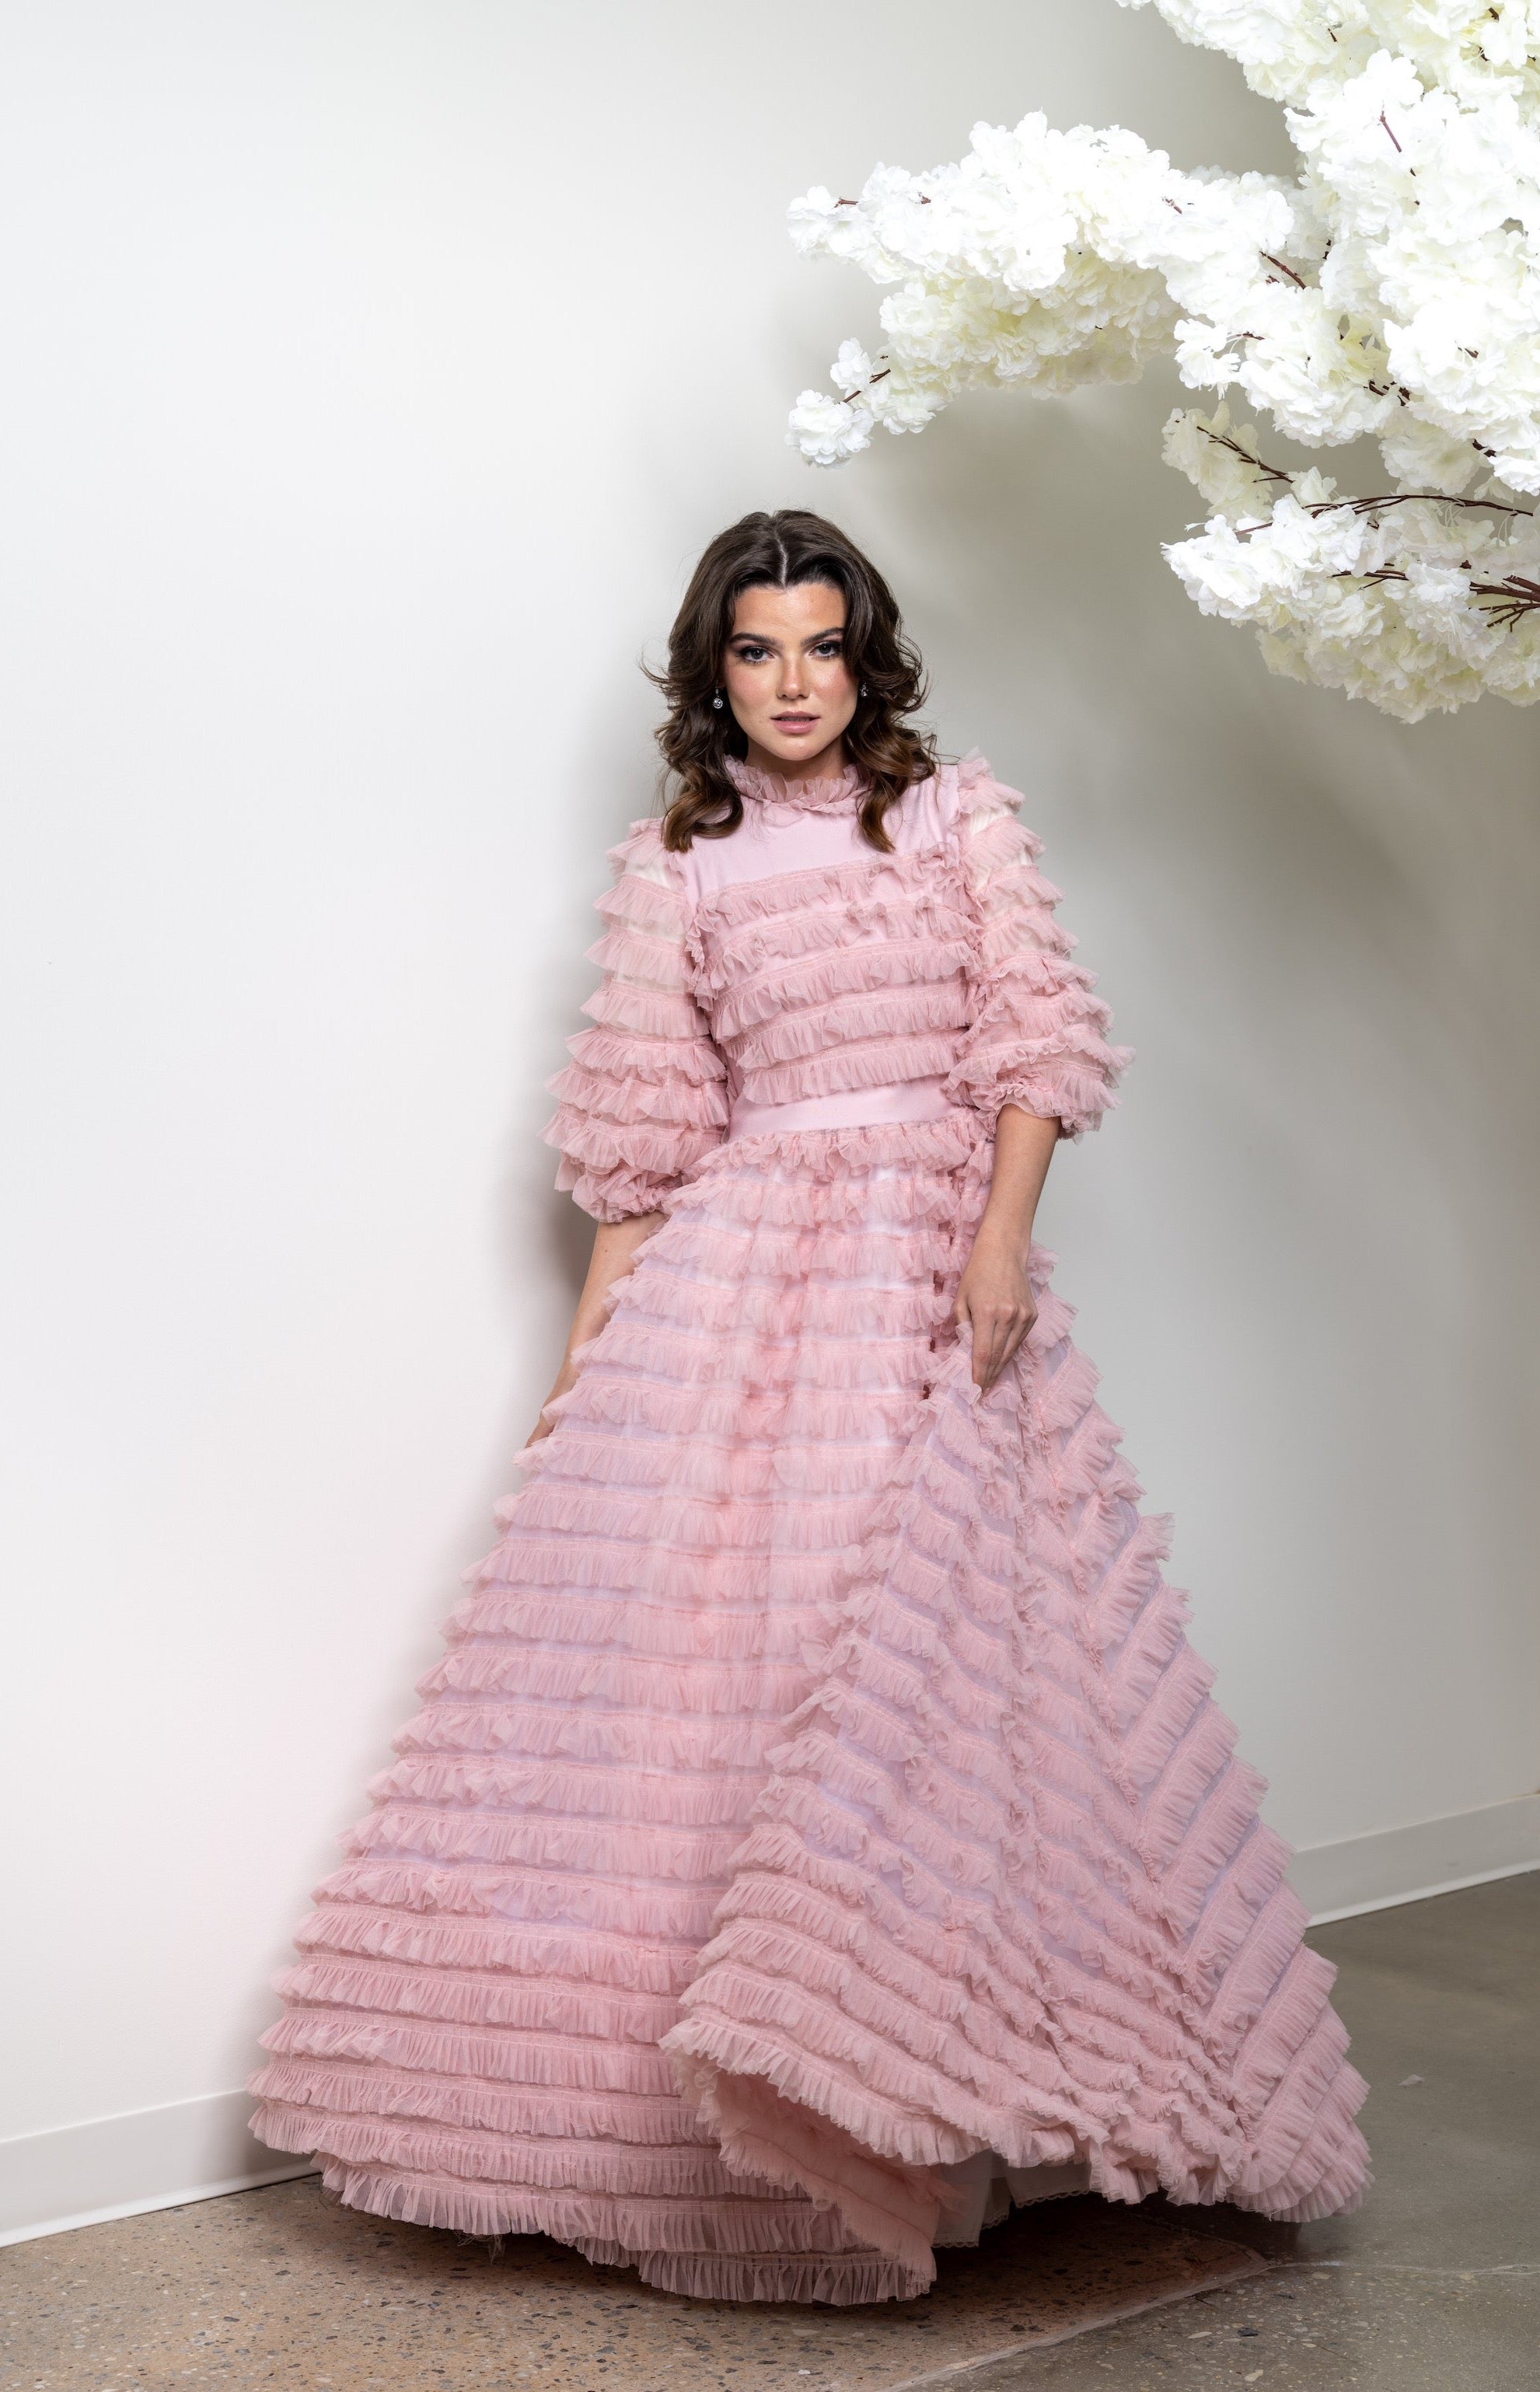 Blush Pink Lace Overlay Dress With Tulle Skirt And Mid-length Sleeves - Le  Parole